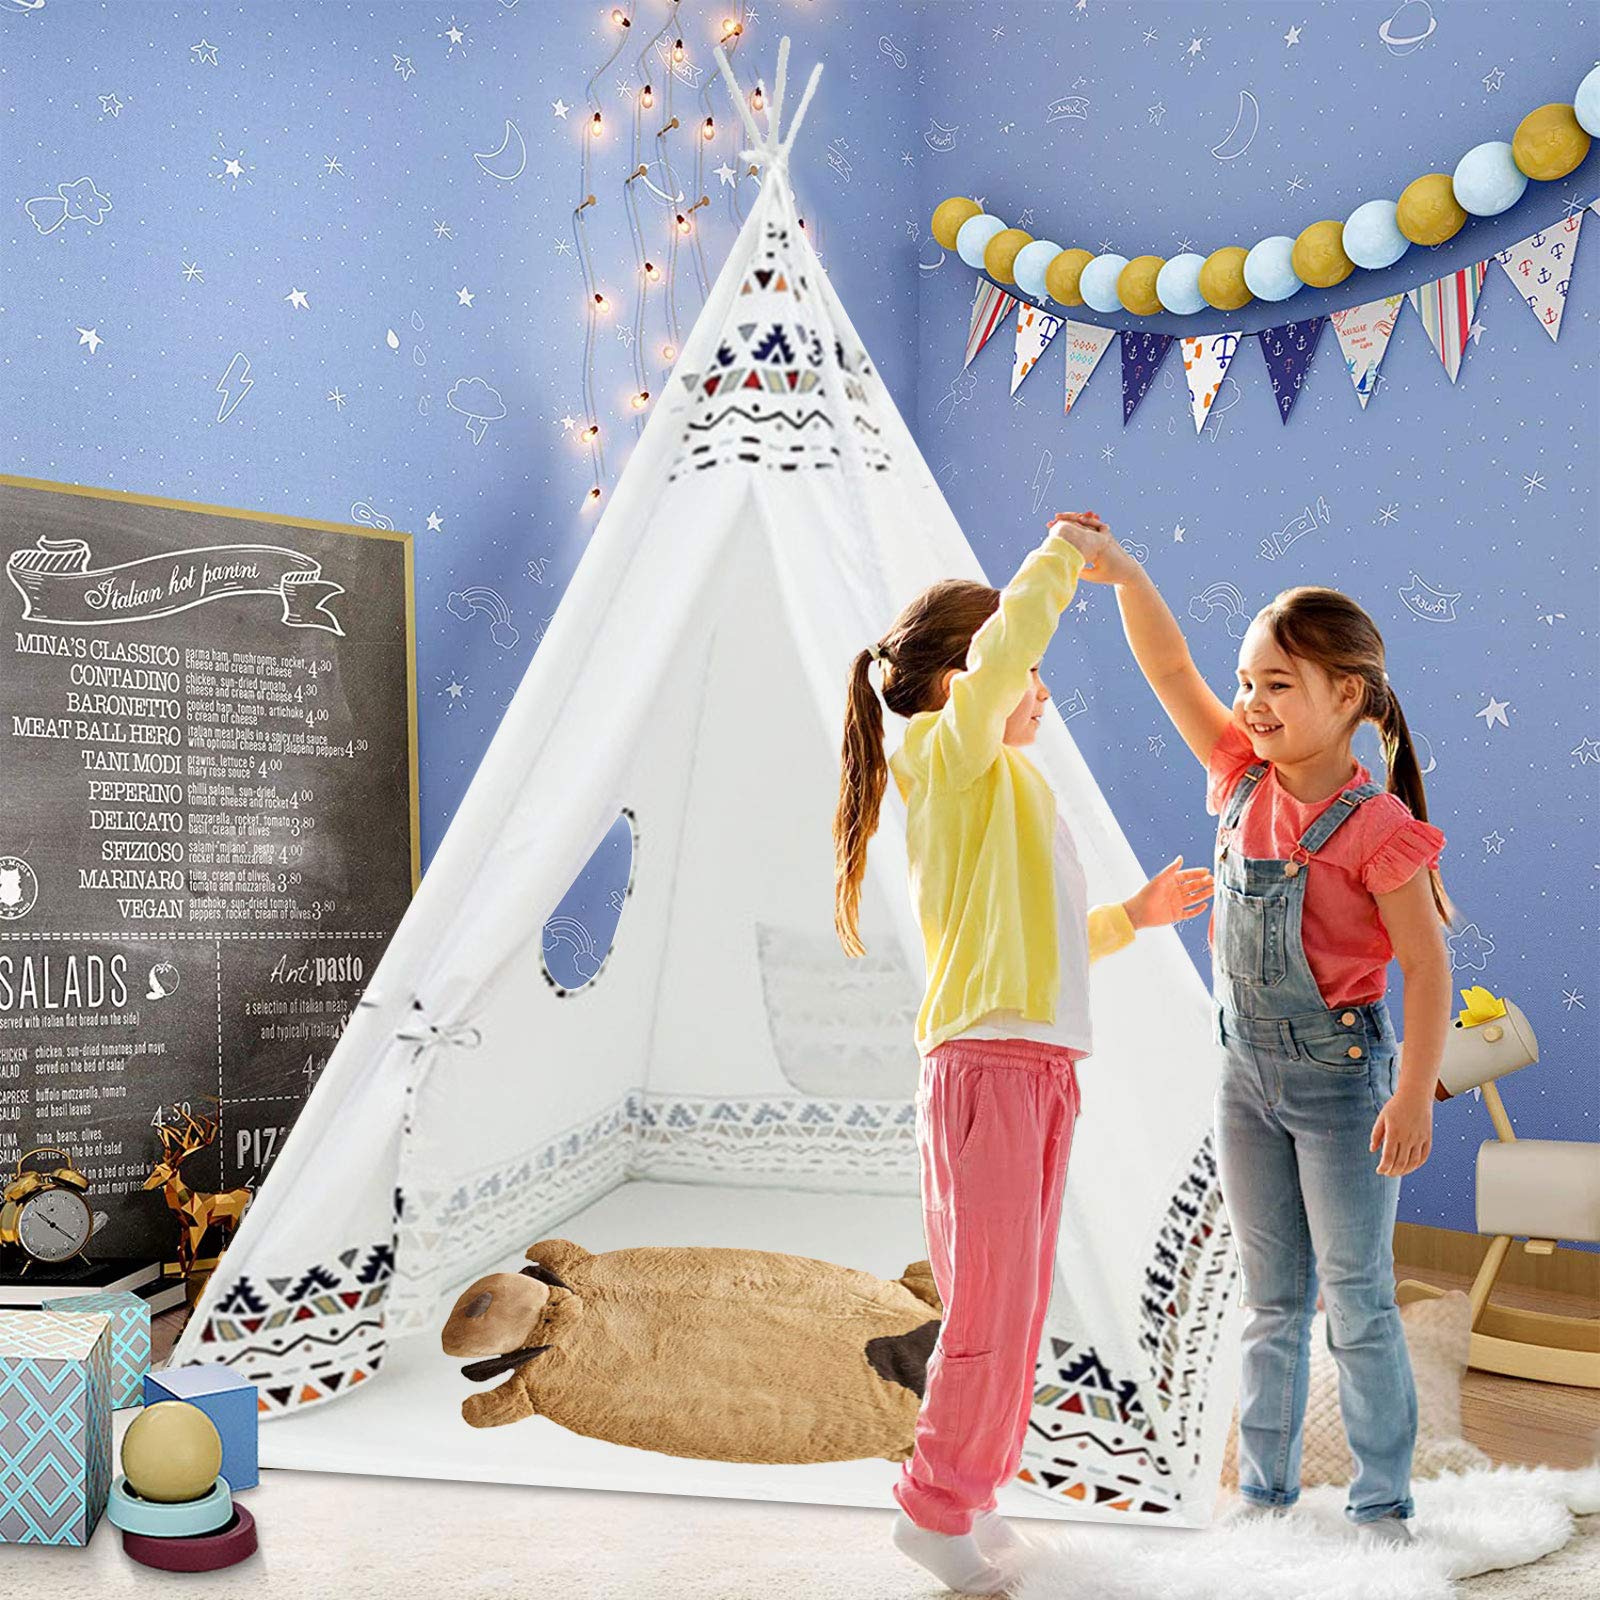 New Fashion Design for Rubber Mat For Baby - Arkmiido Teepee Tent for Kids Raw White Canvas Teepee with Windows Carry Case Foldable Children Play Tents Playhouse Toys for Baby Toddler Girls/Boys I...